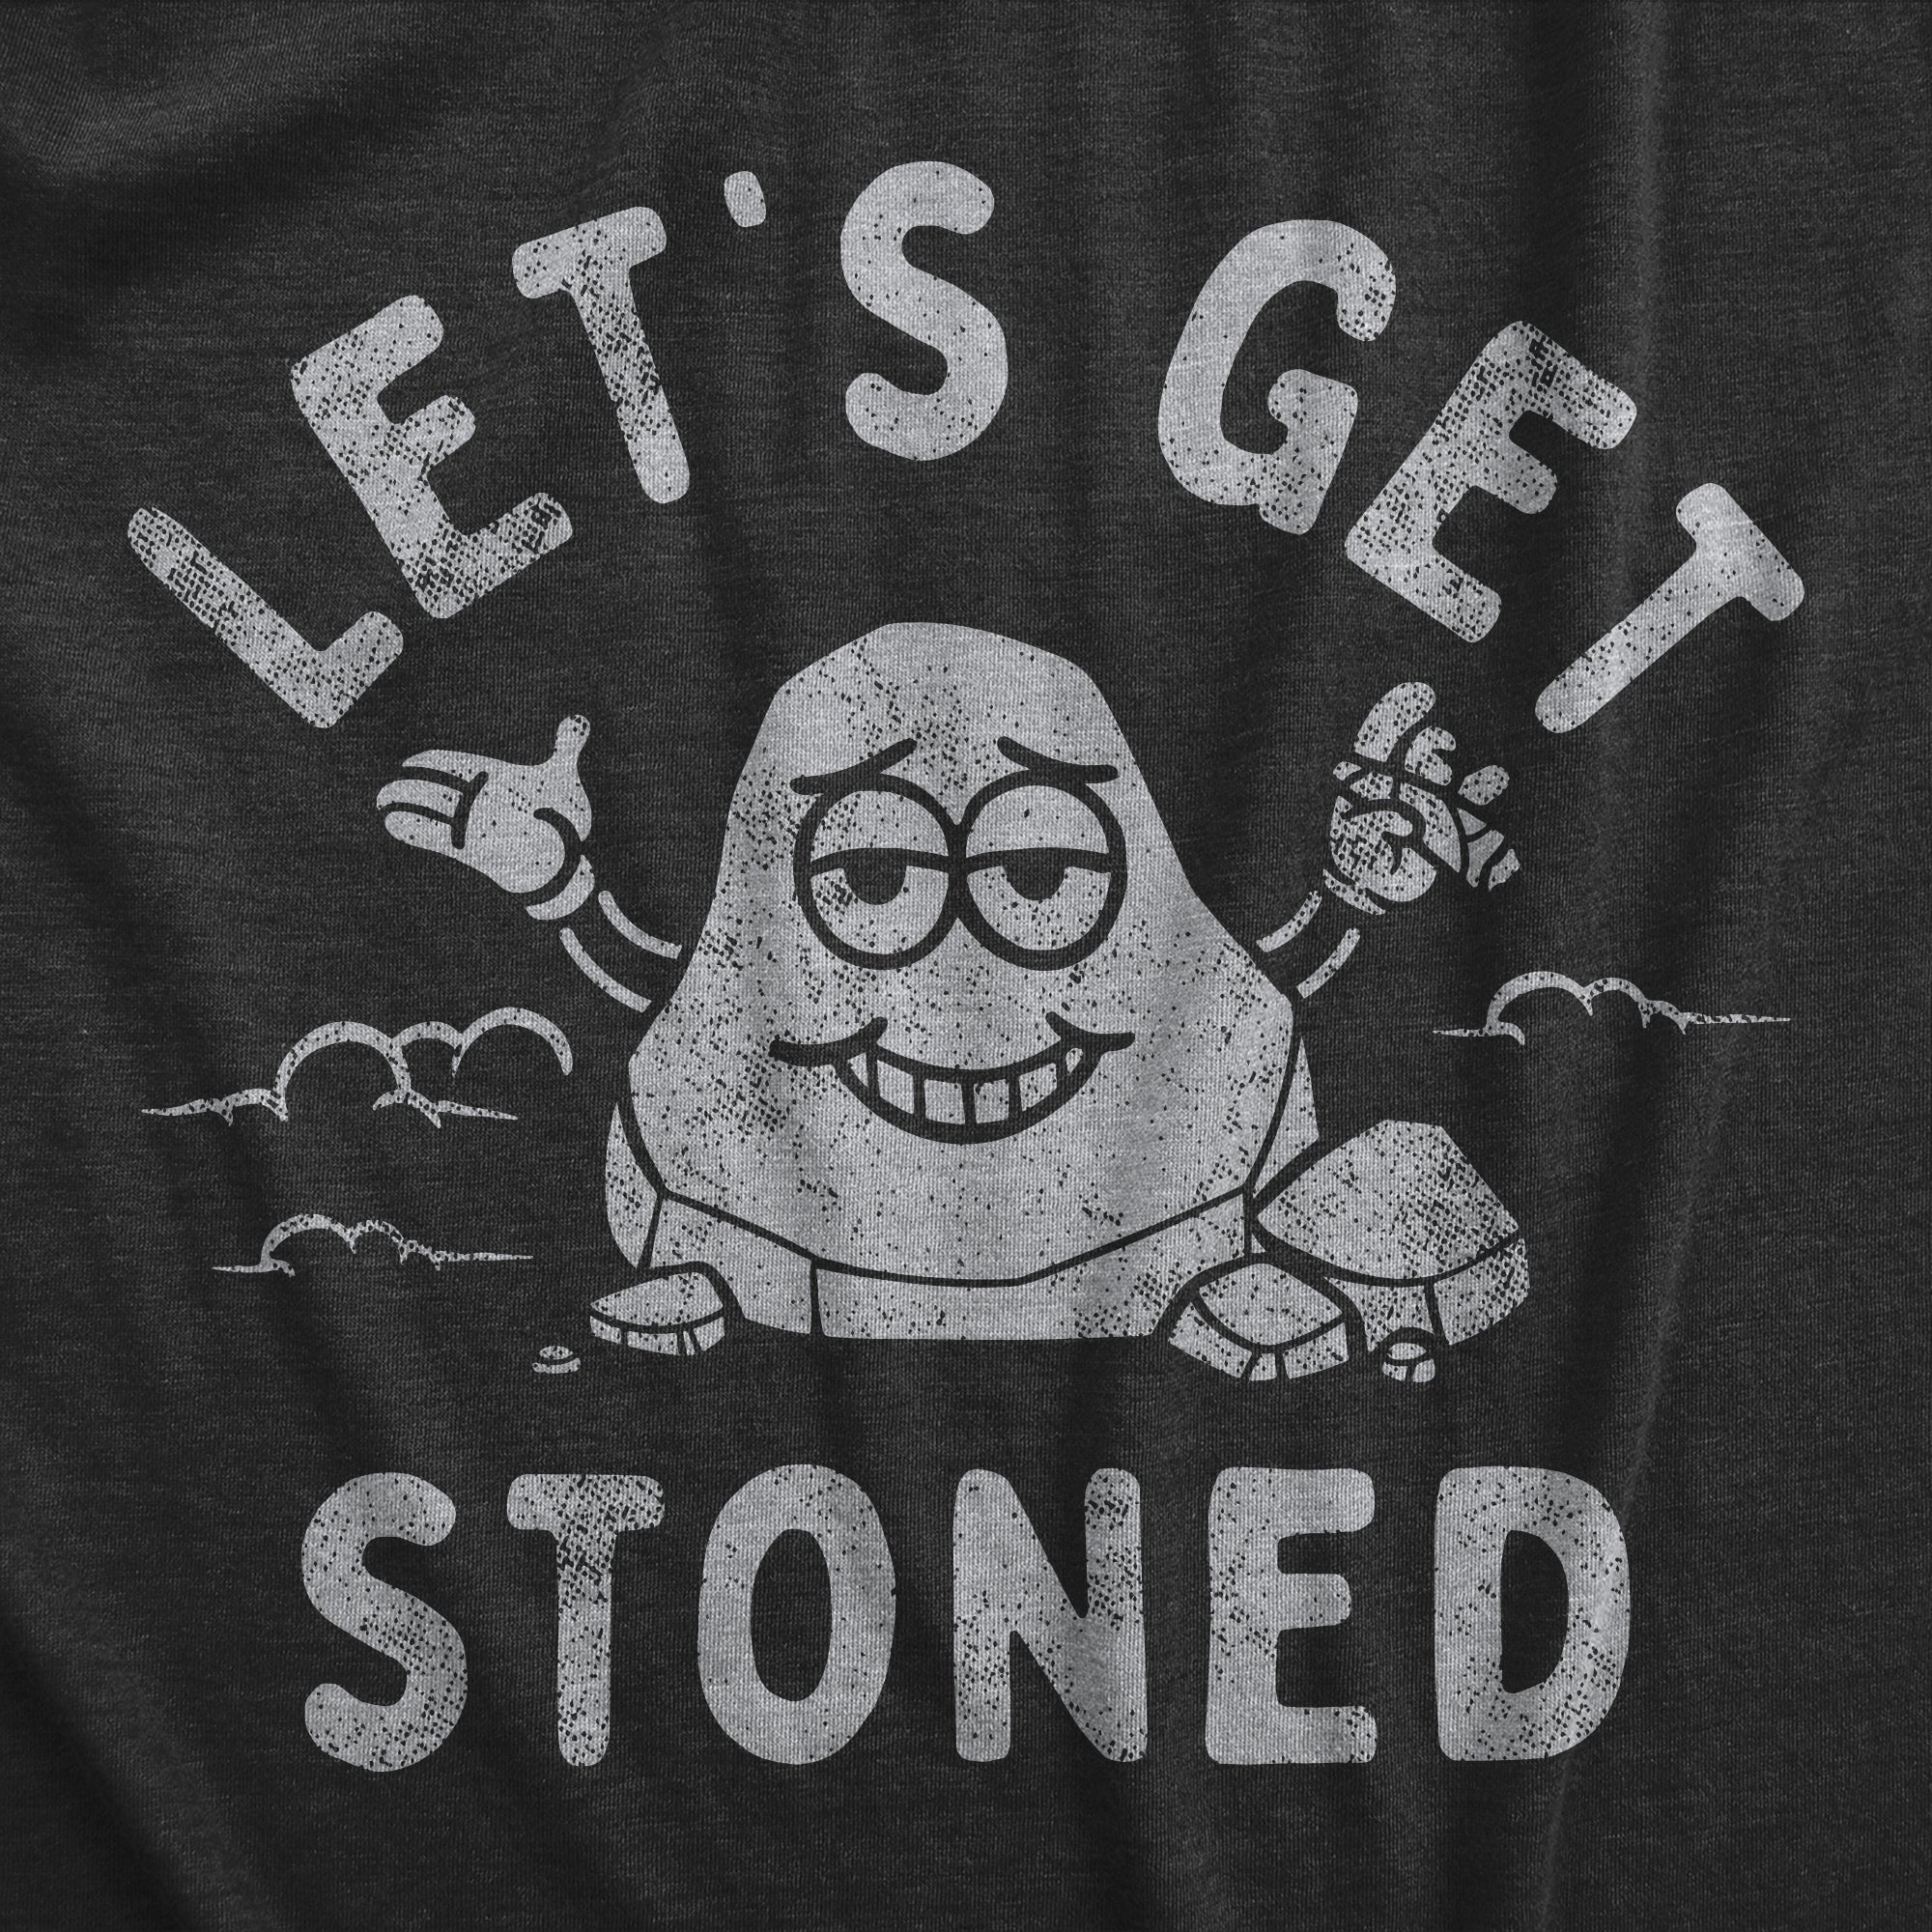 Funny Heather Black - STONED Lets Get Stoned Mens T Shirt Nerdy 420 Sarcastic Tee